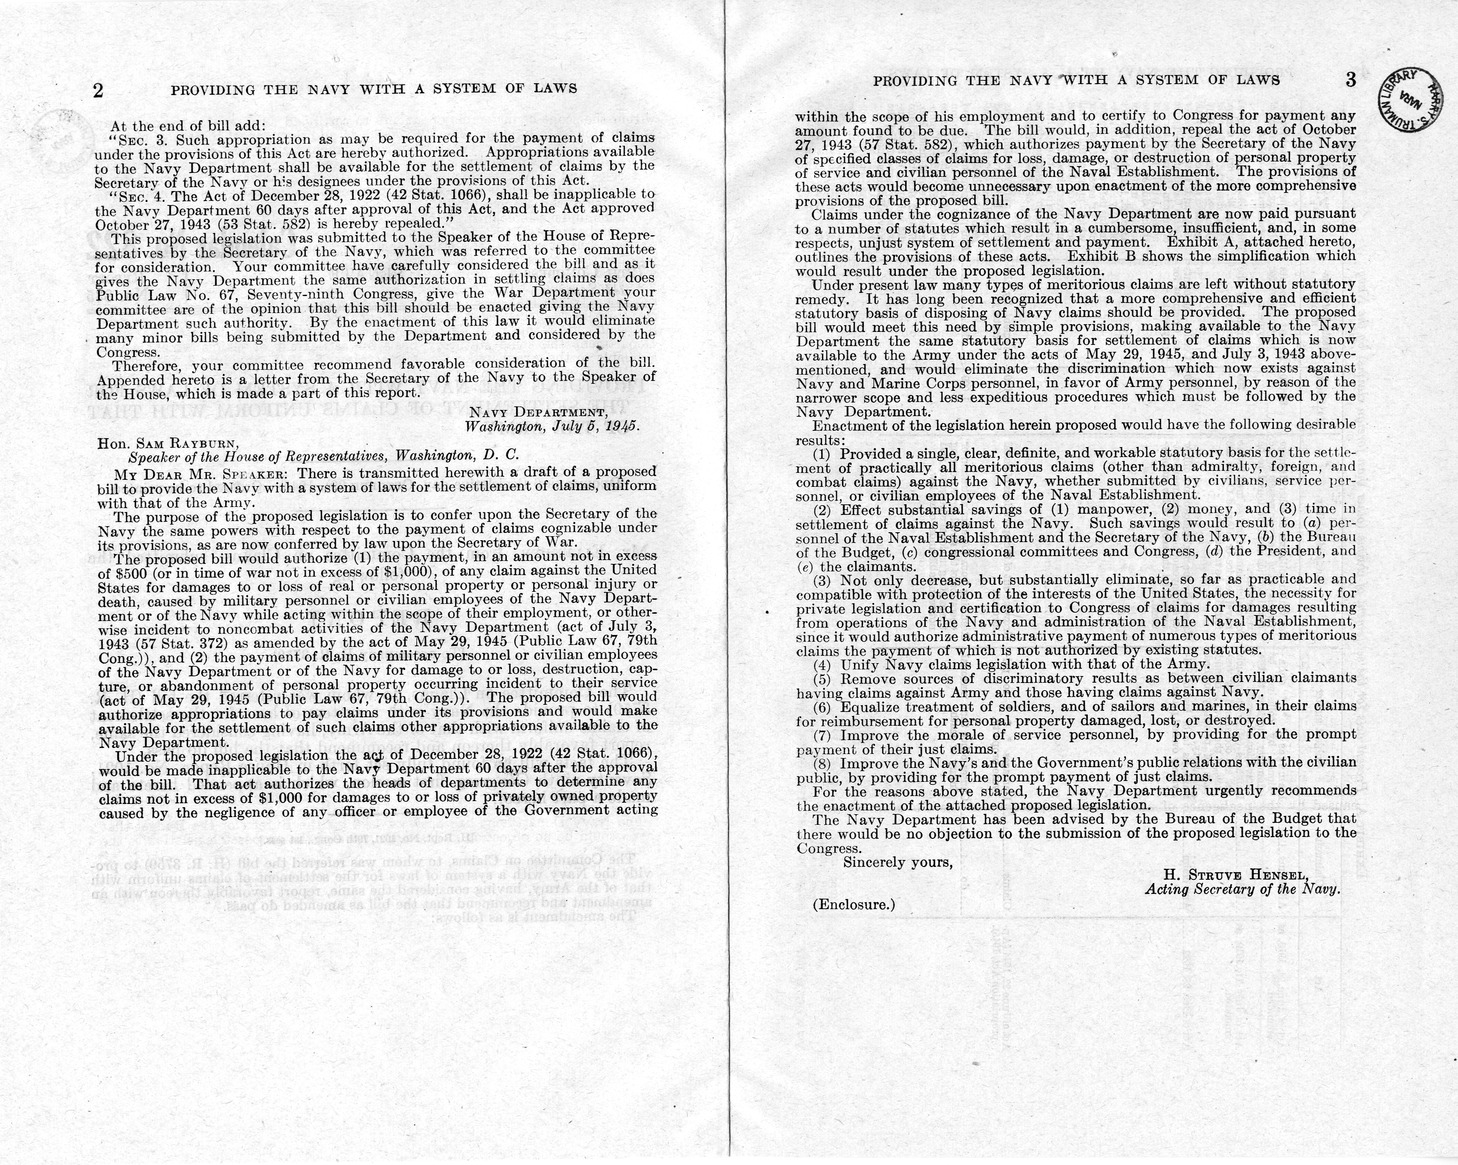 Memorandum from Frederick J. Bailey to M. C. Latta, H.R. 3759, To Provide the Navy with a System of Laws for the Settlement of Claims Uniform with That of the Army, with Attachments